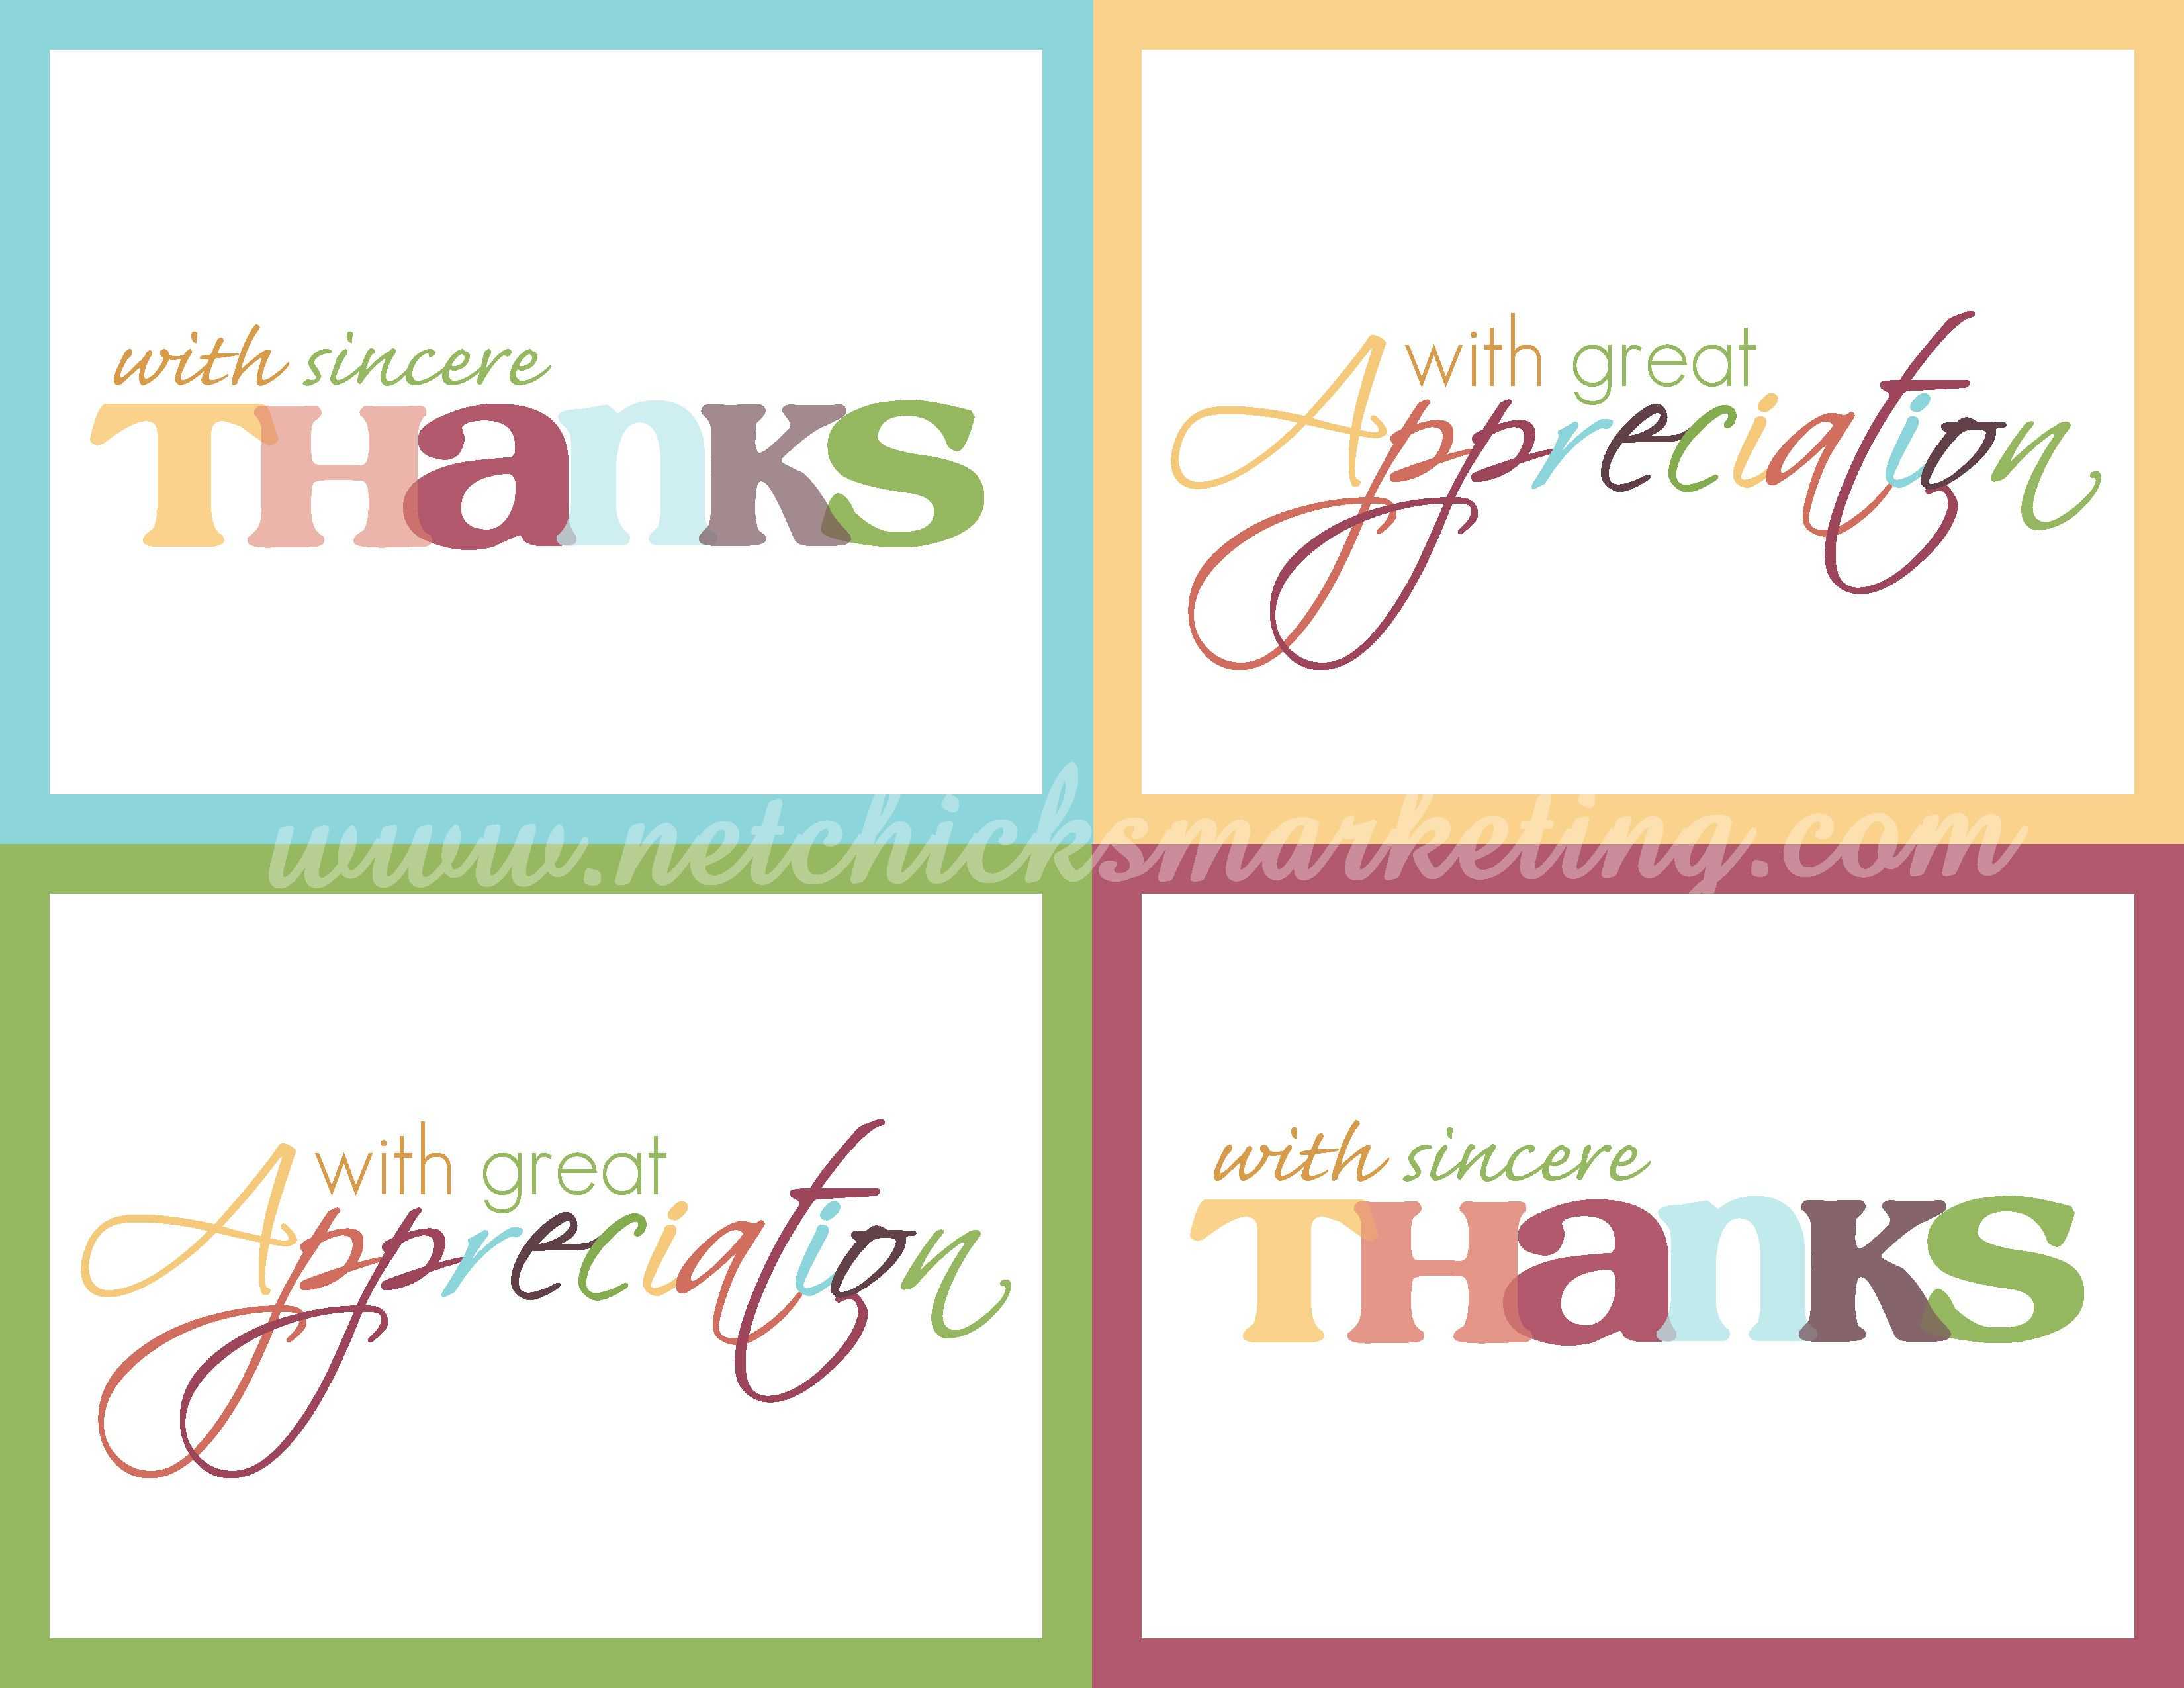 010 Thank You Card Template Free Ideas Unbelievable Birthday Intended For Thank You Note Cards Template